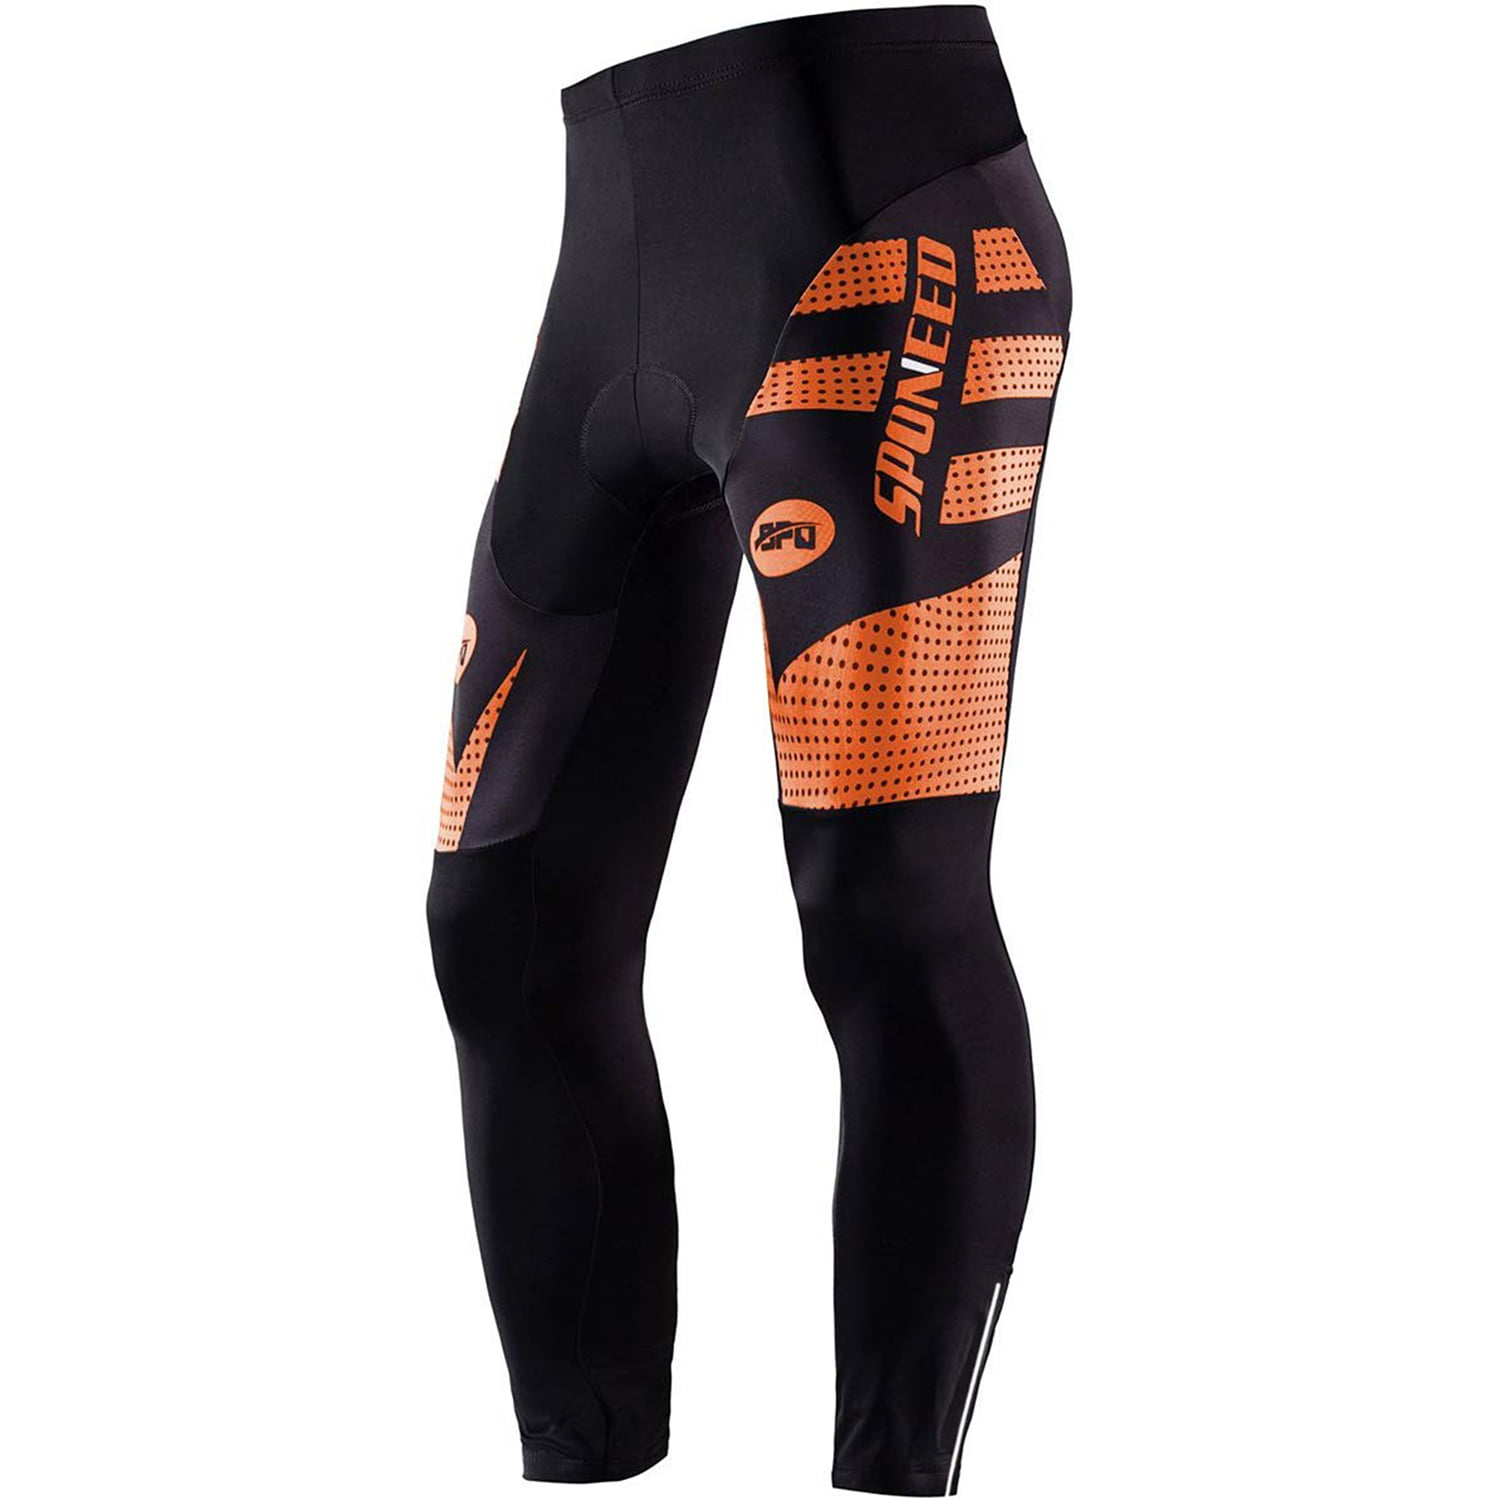 Mens Cycling Pants 3D Padded Road Bike Long Legging Tights with Pockets for Outdoor Riding Bicycle 